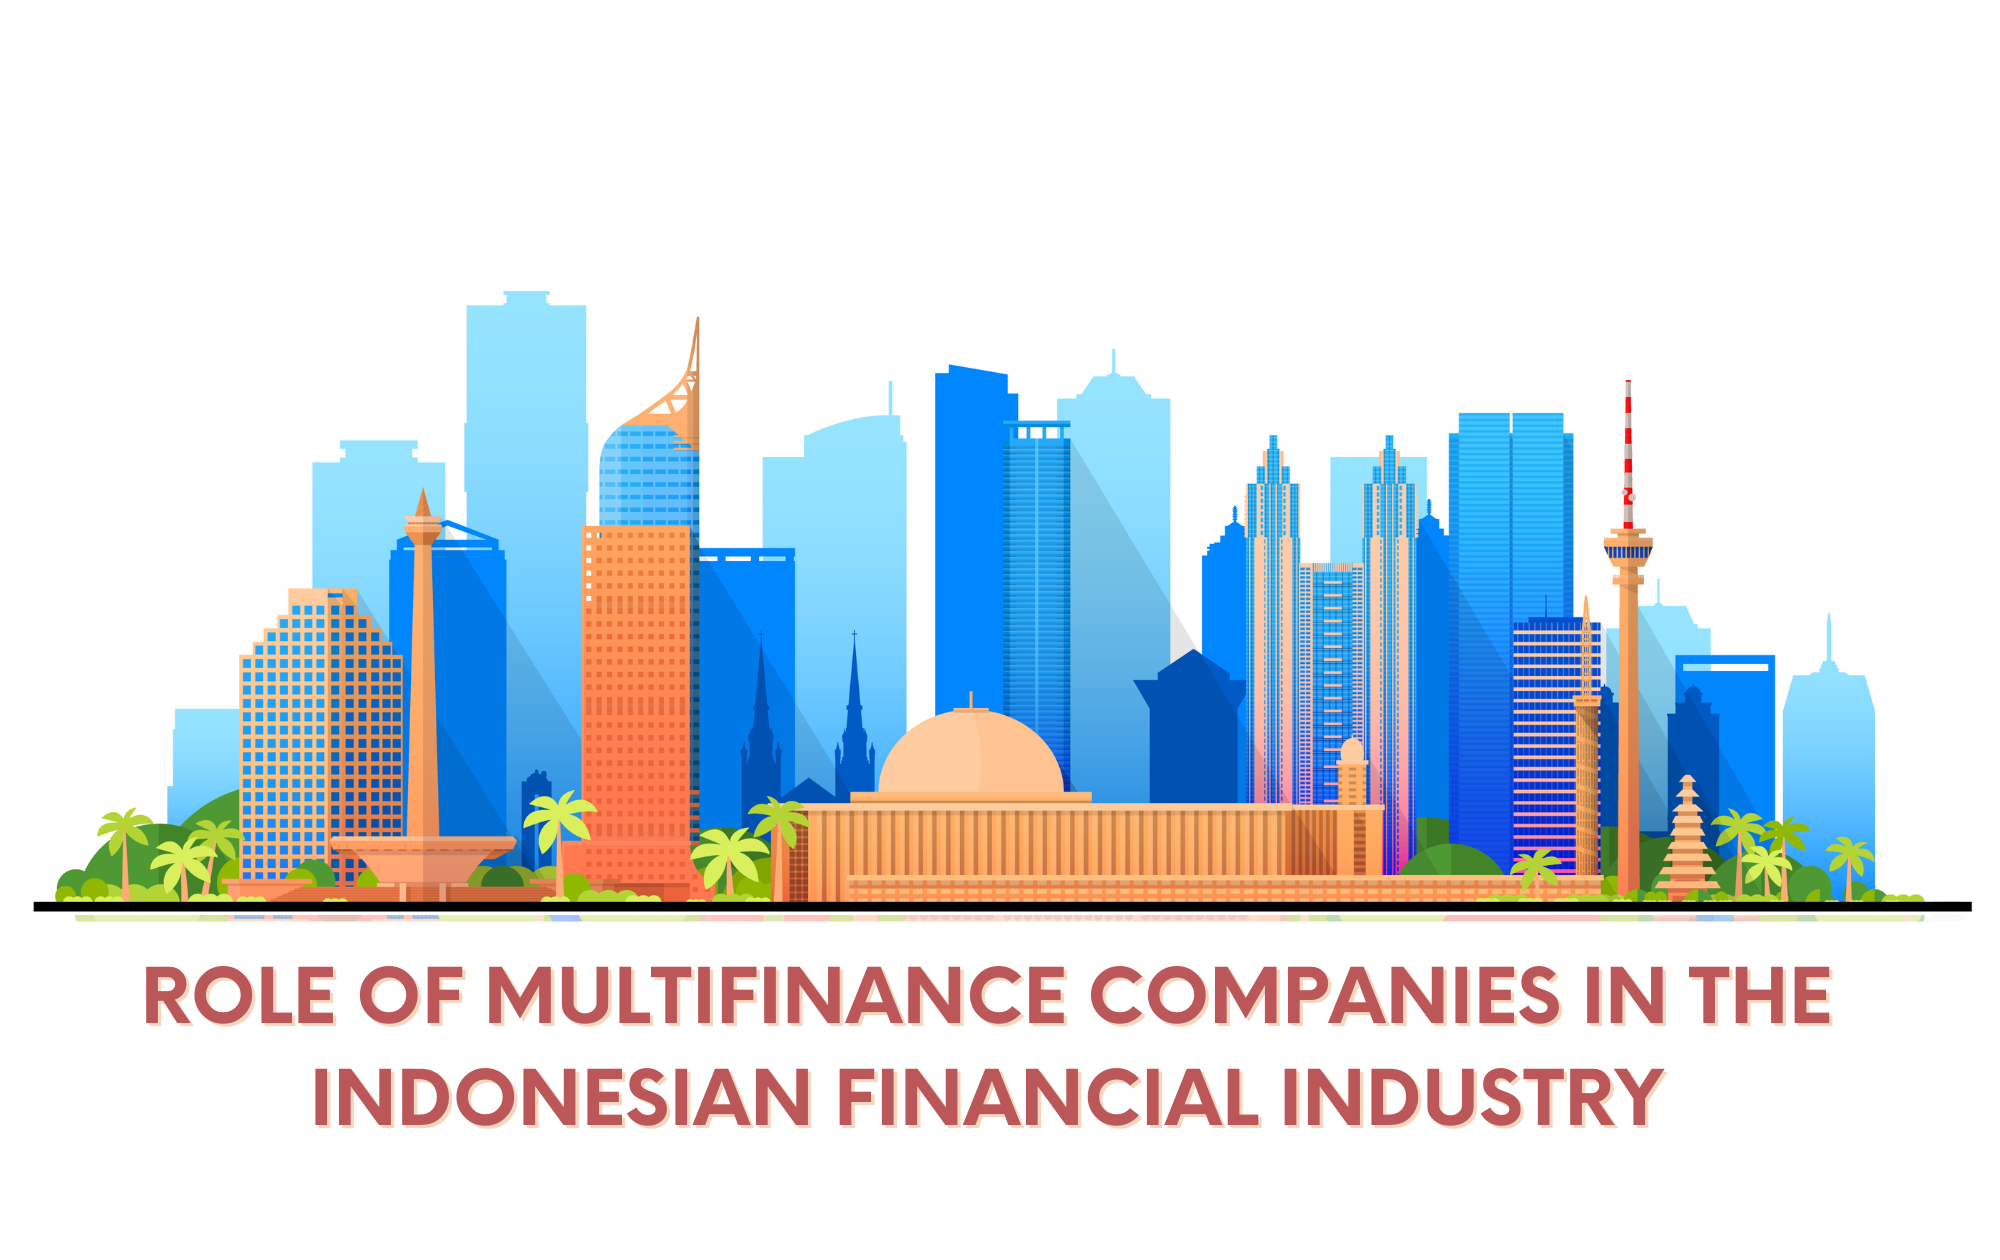 Role of Multifinance Companies in the Indonesian Financial Industry